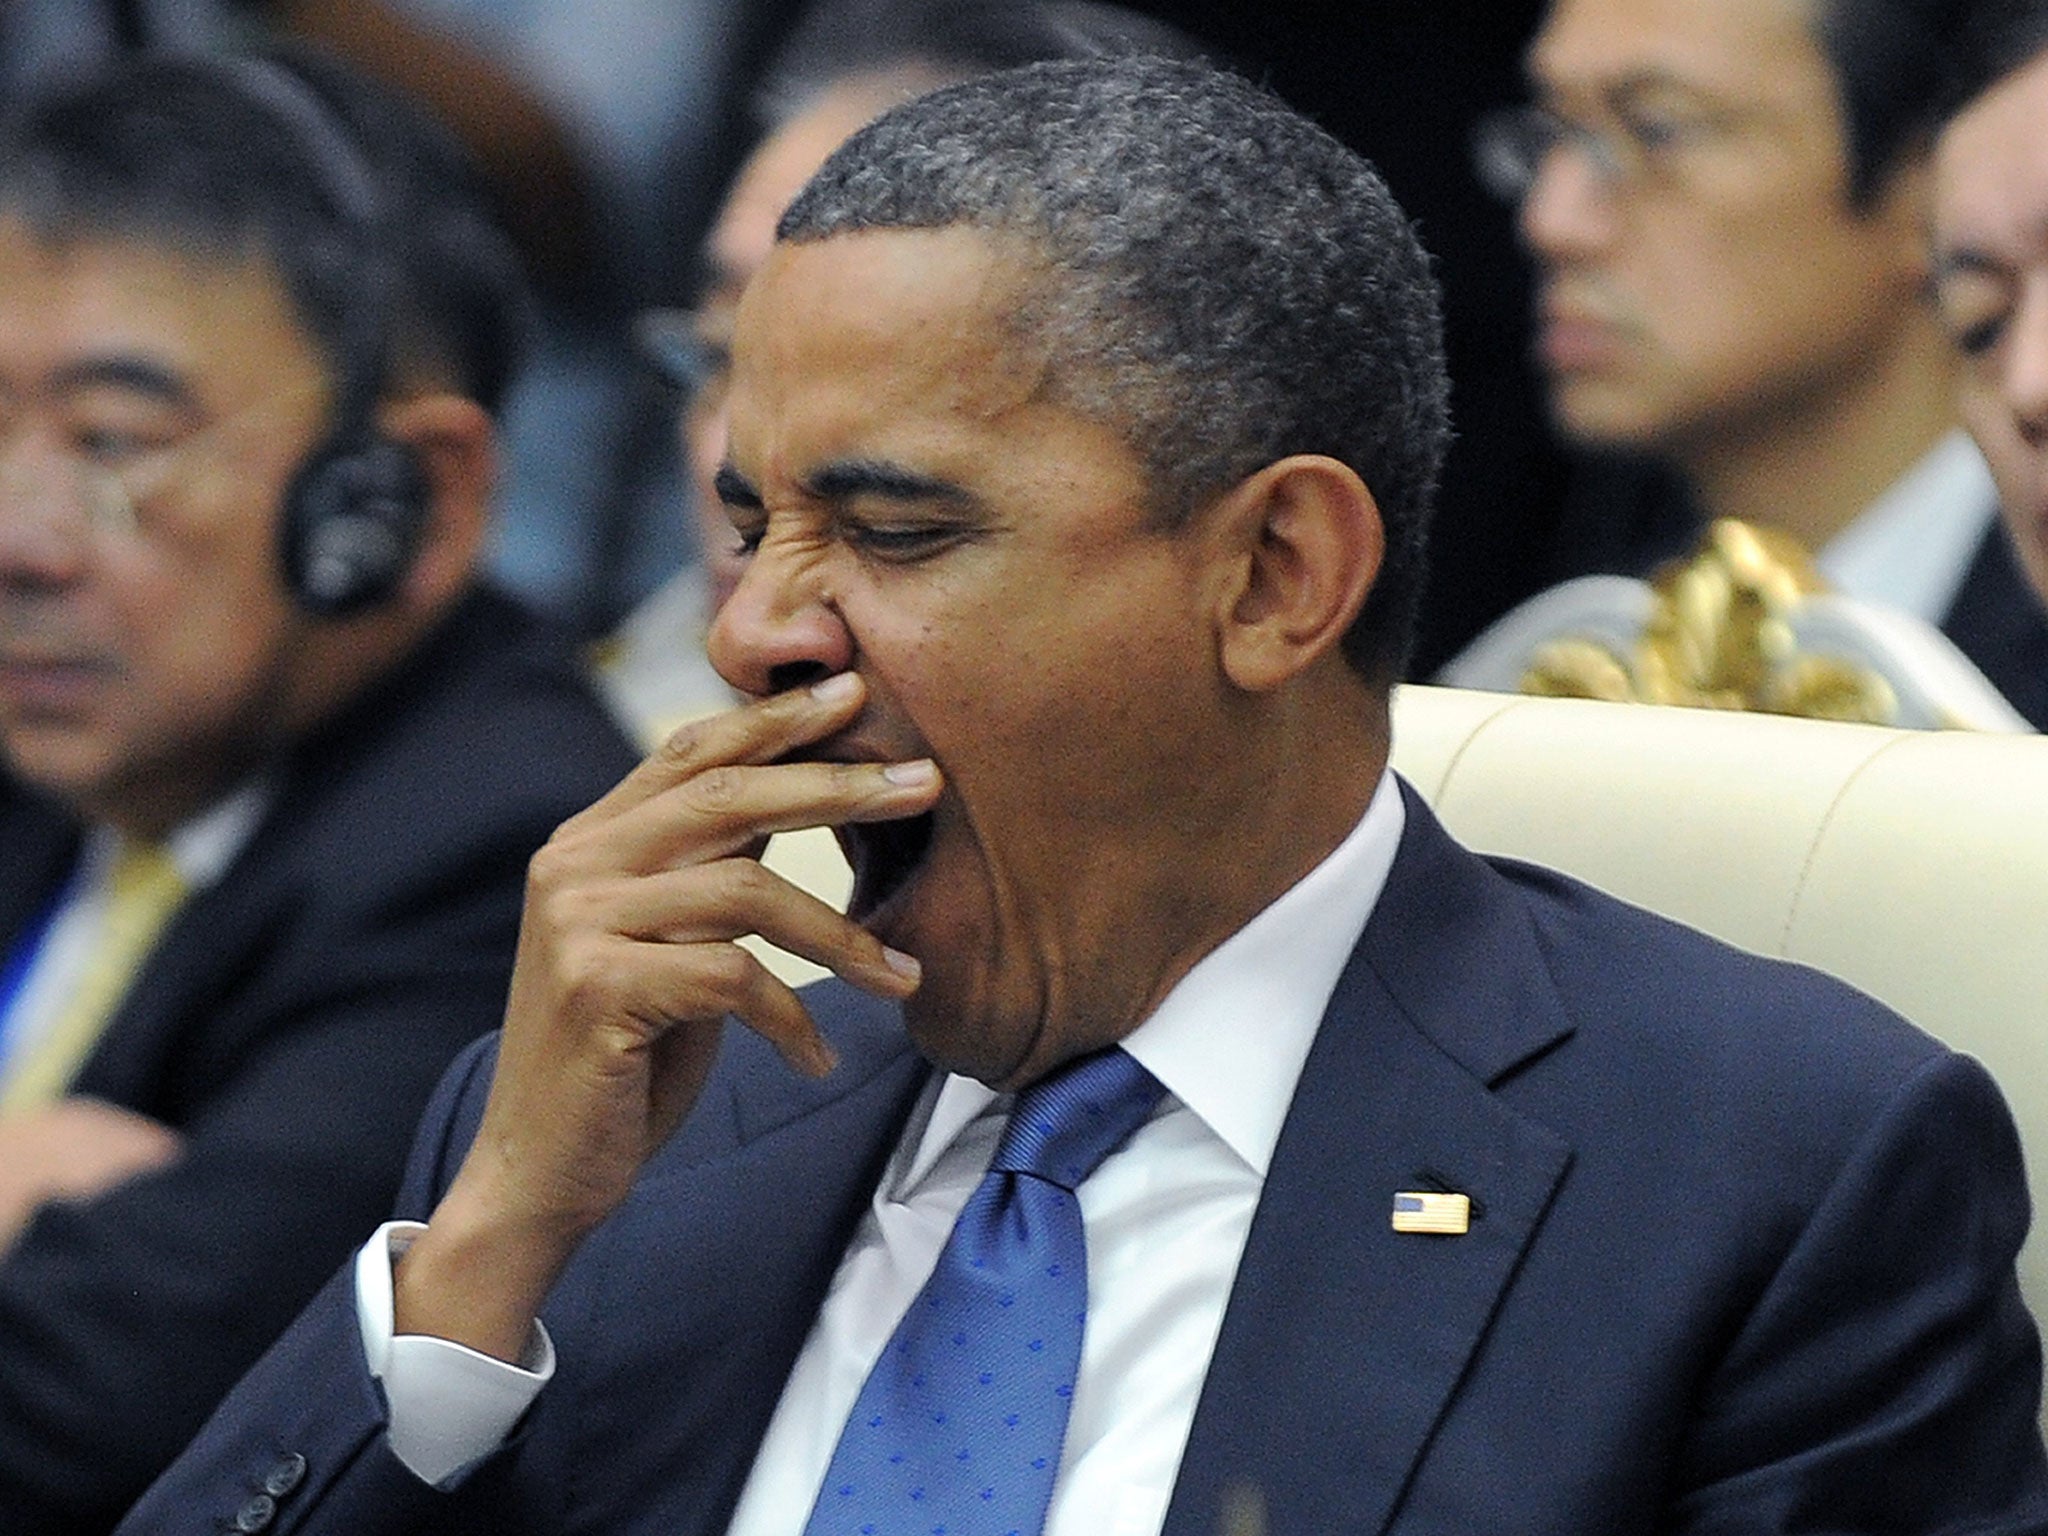 Barack Obama yawns at an East Asian Summit Plenary Session at the Peace Palace in Phnom Penh on November 20, 2012.